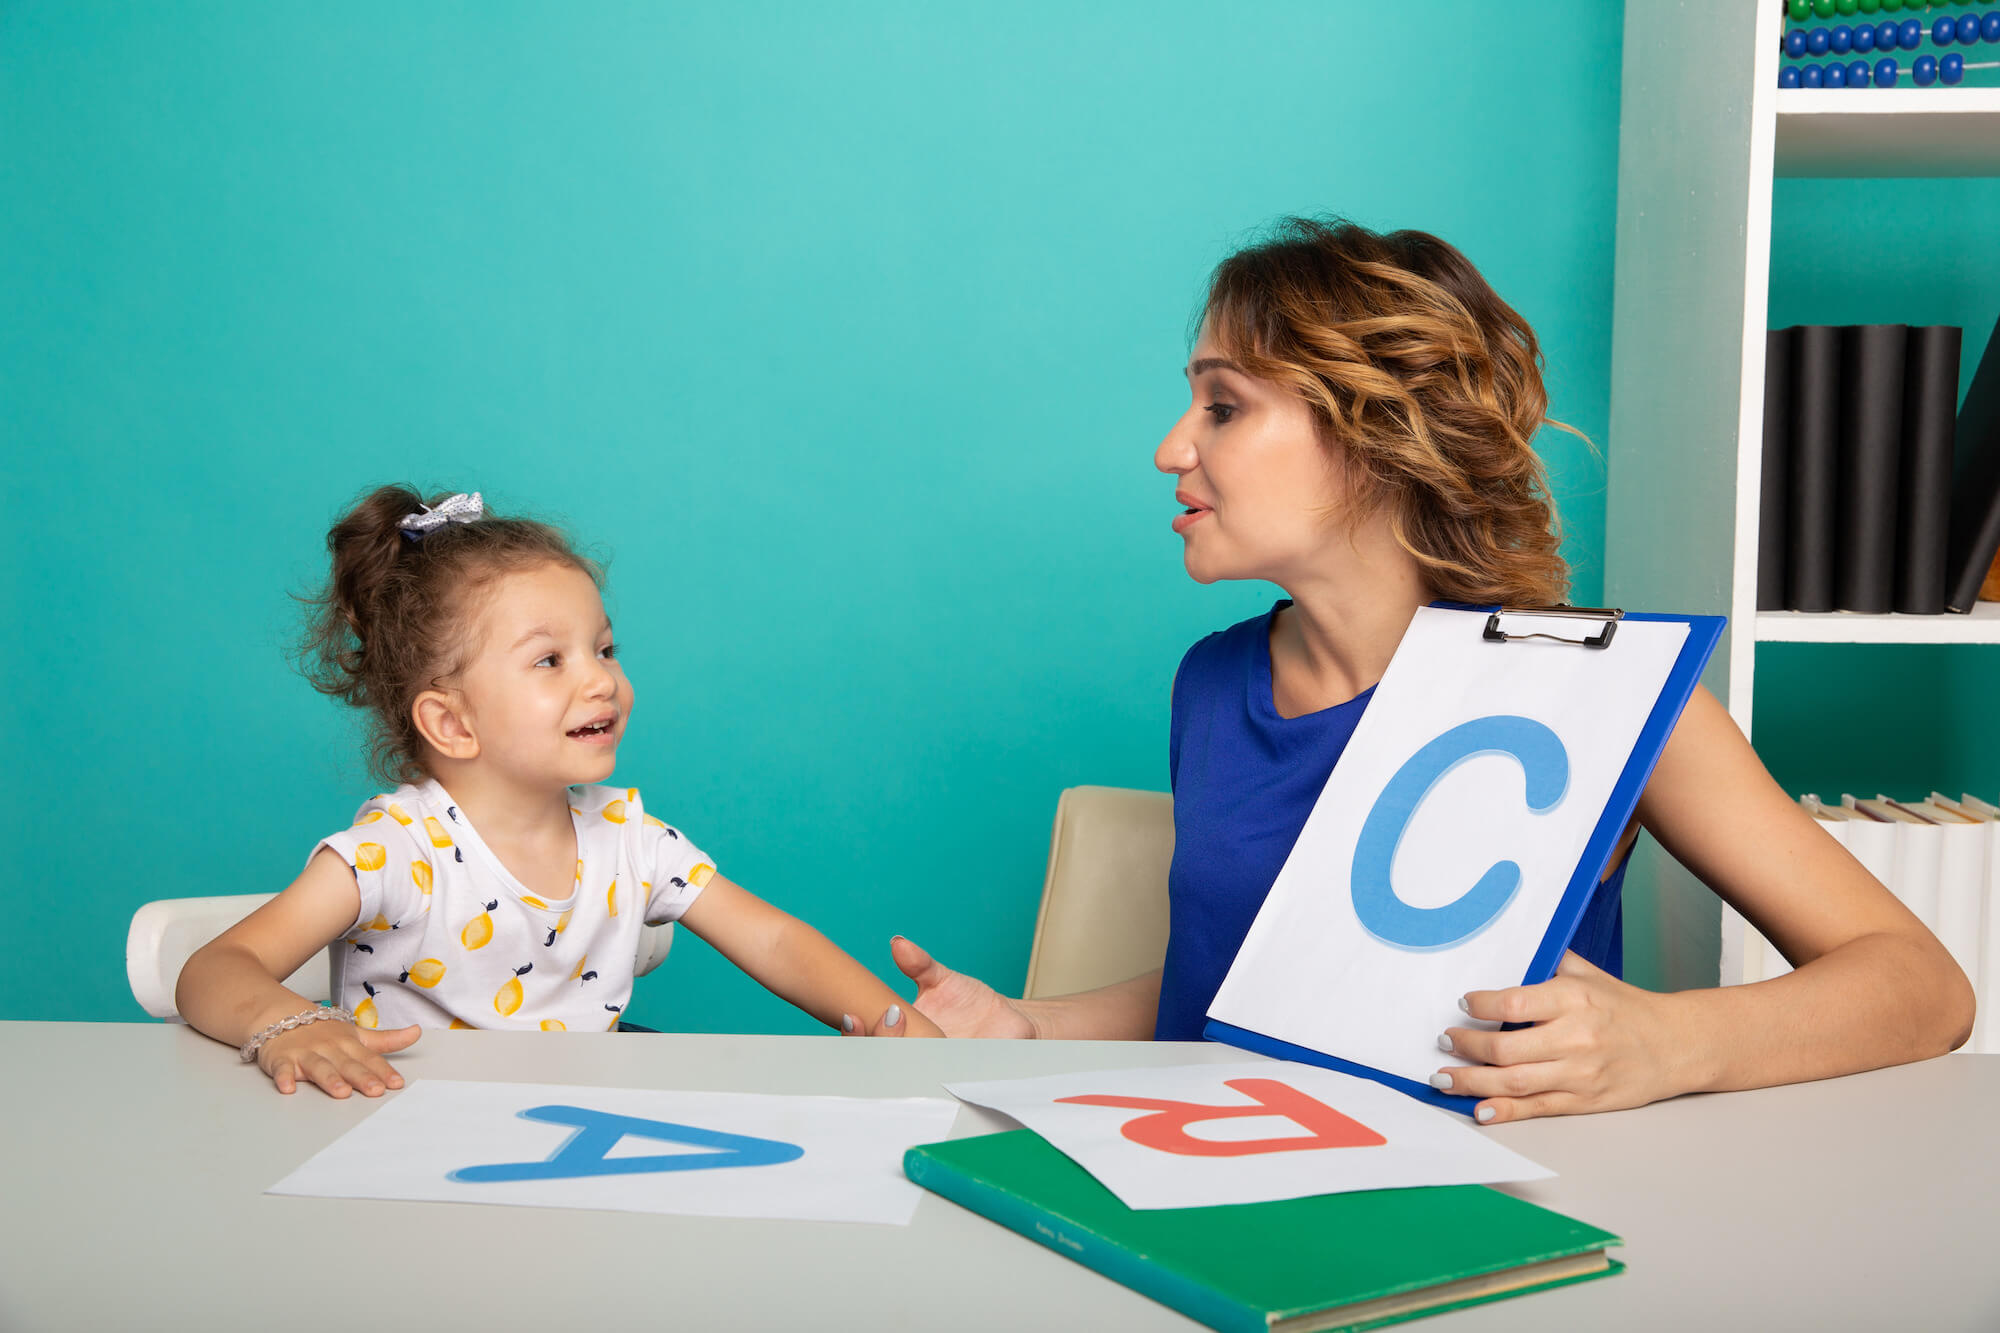 Duluth GA Governess services, hire a governess in Duluth GA